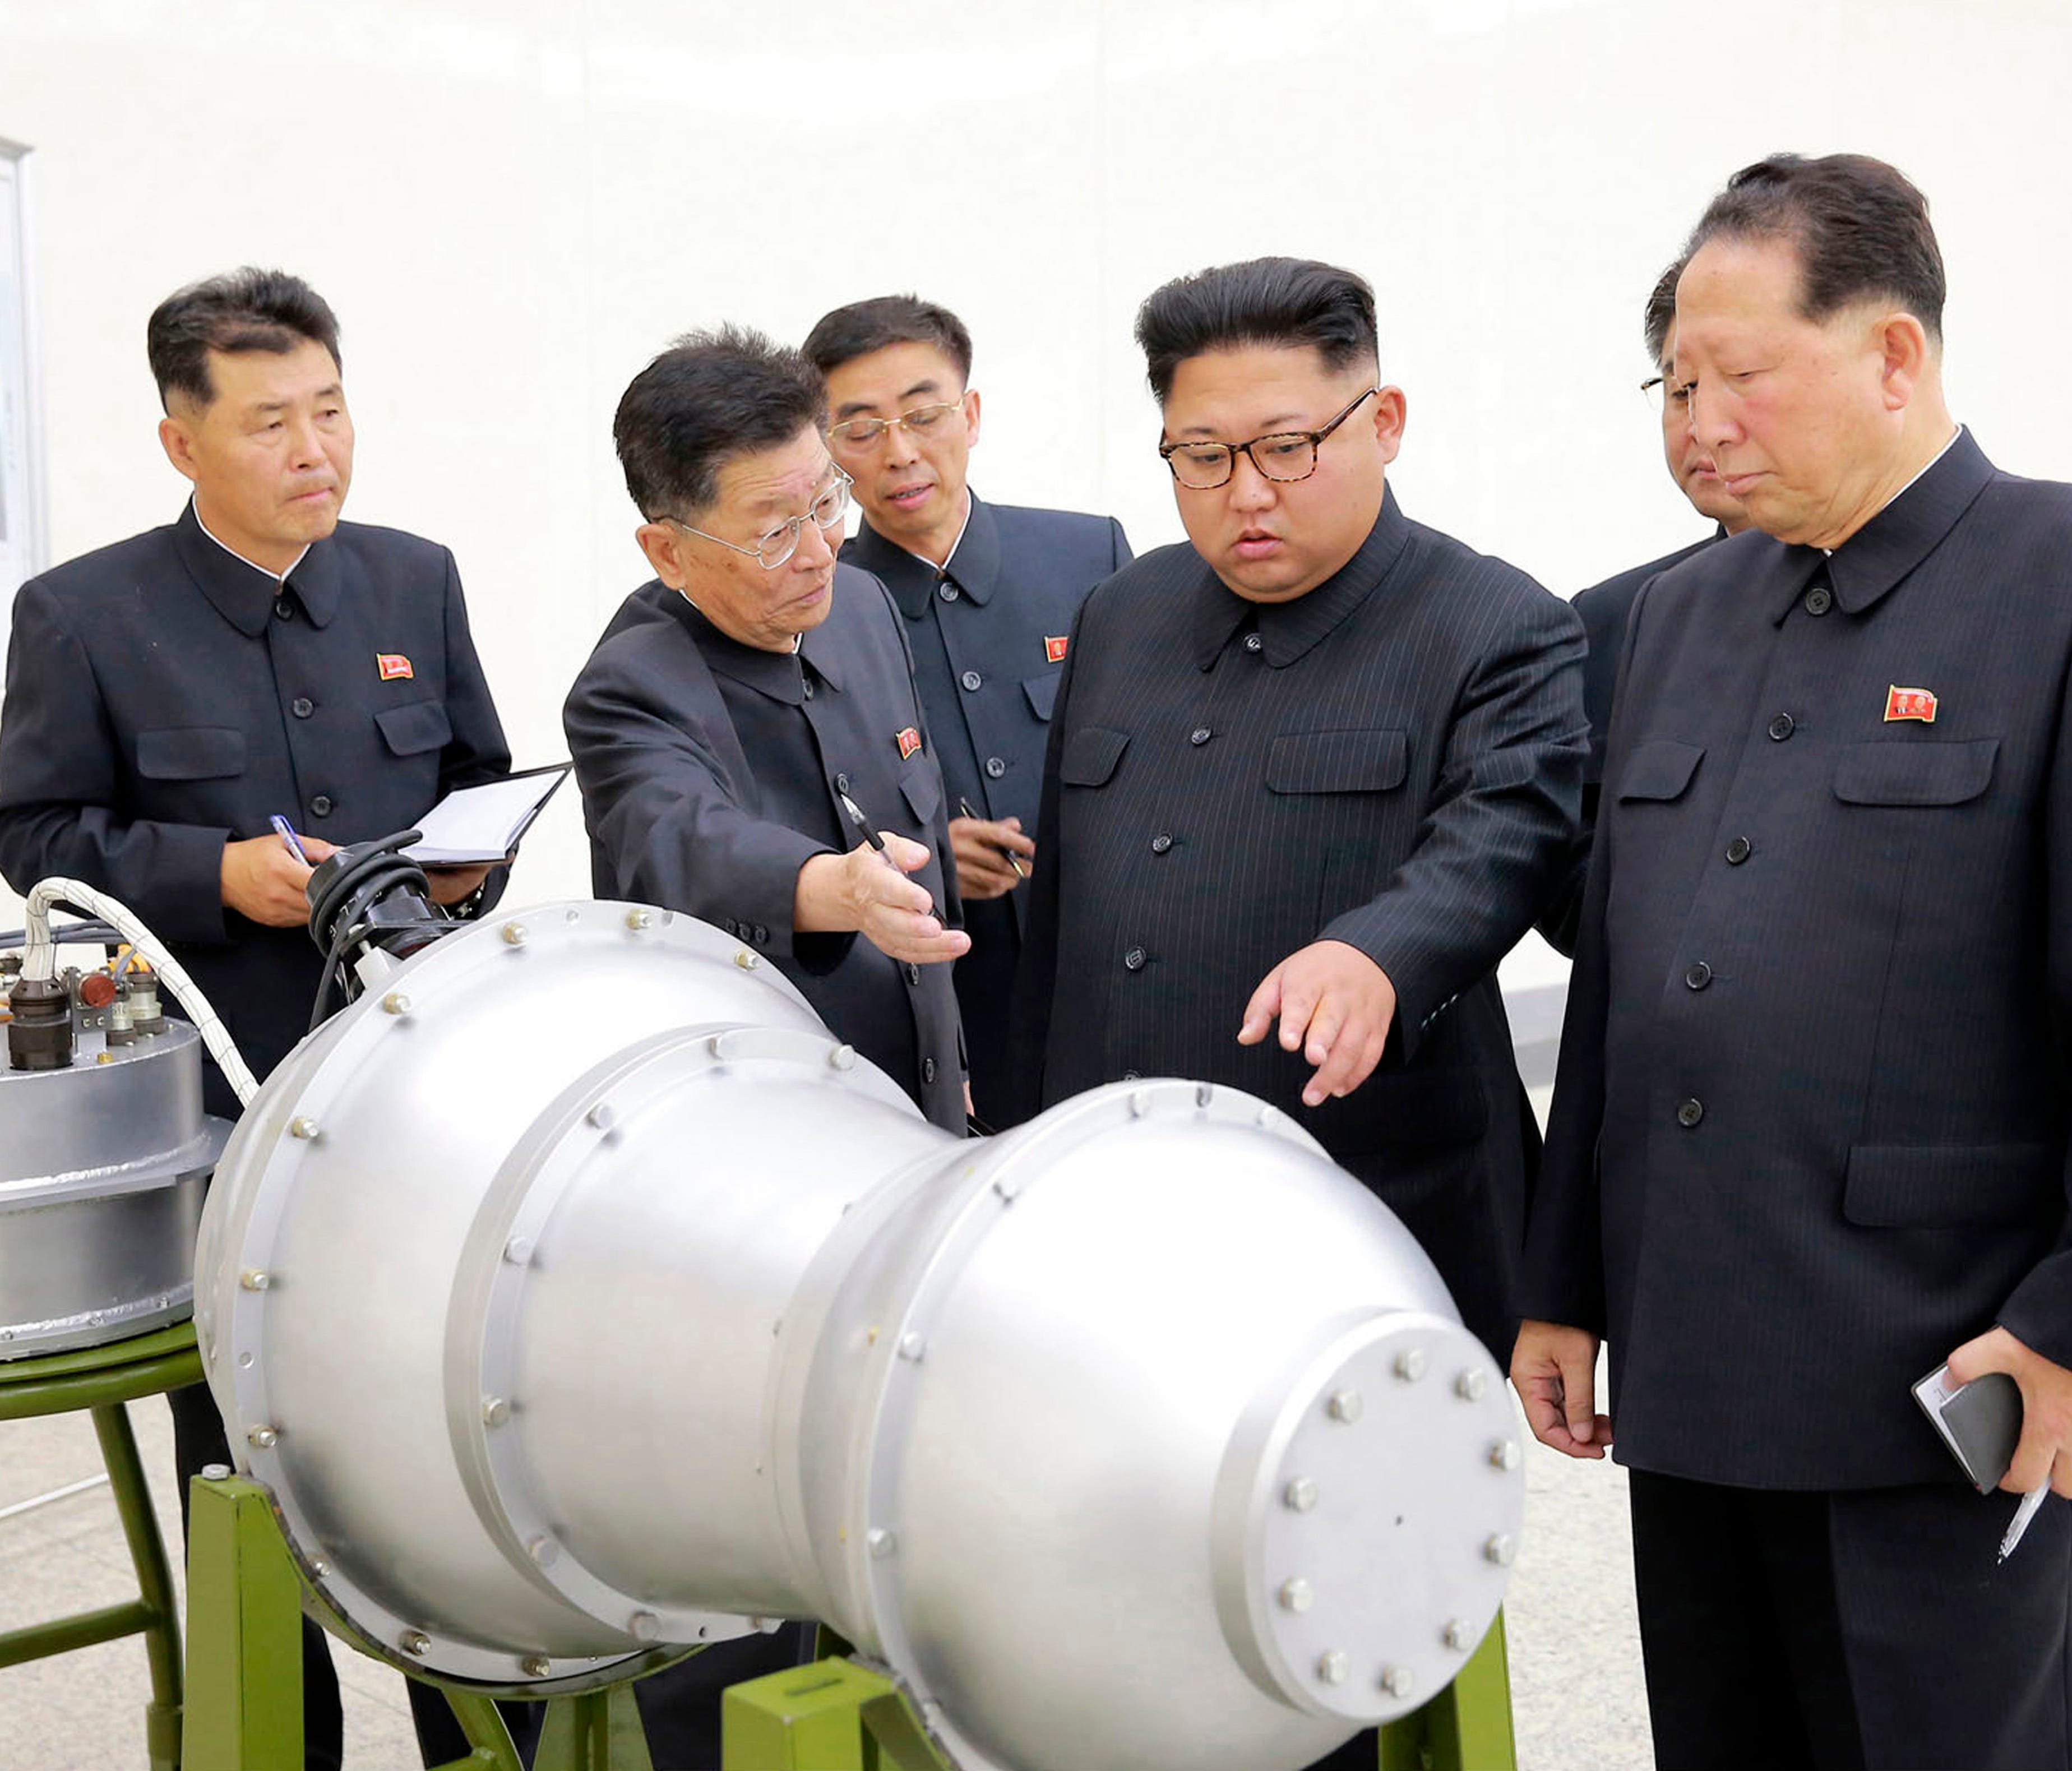 This undated file photo distributed on Sept. 3, 2017, by the North Korean government, shows North Korean leader Kim Jong Un, second from right, at an undisclosed location in North Korea.